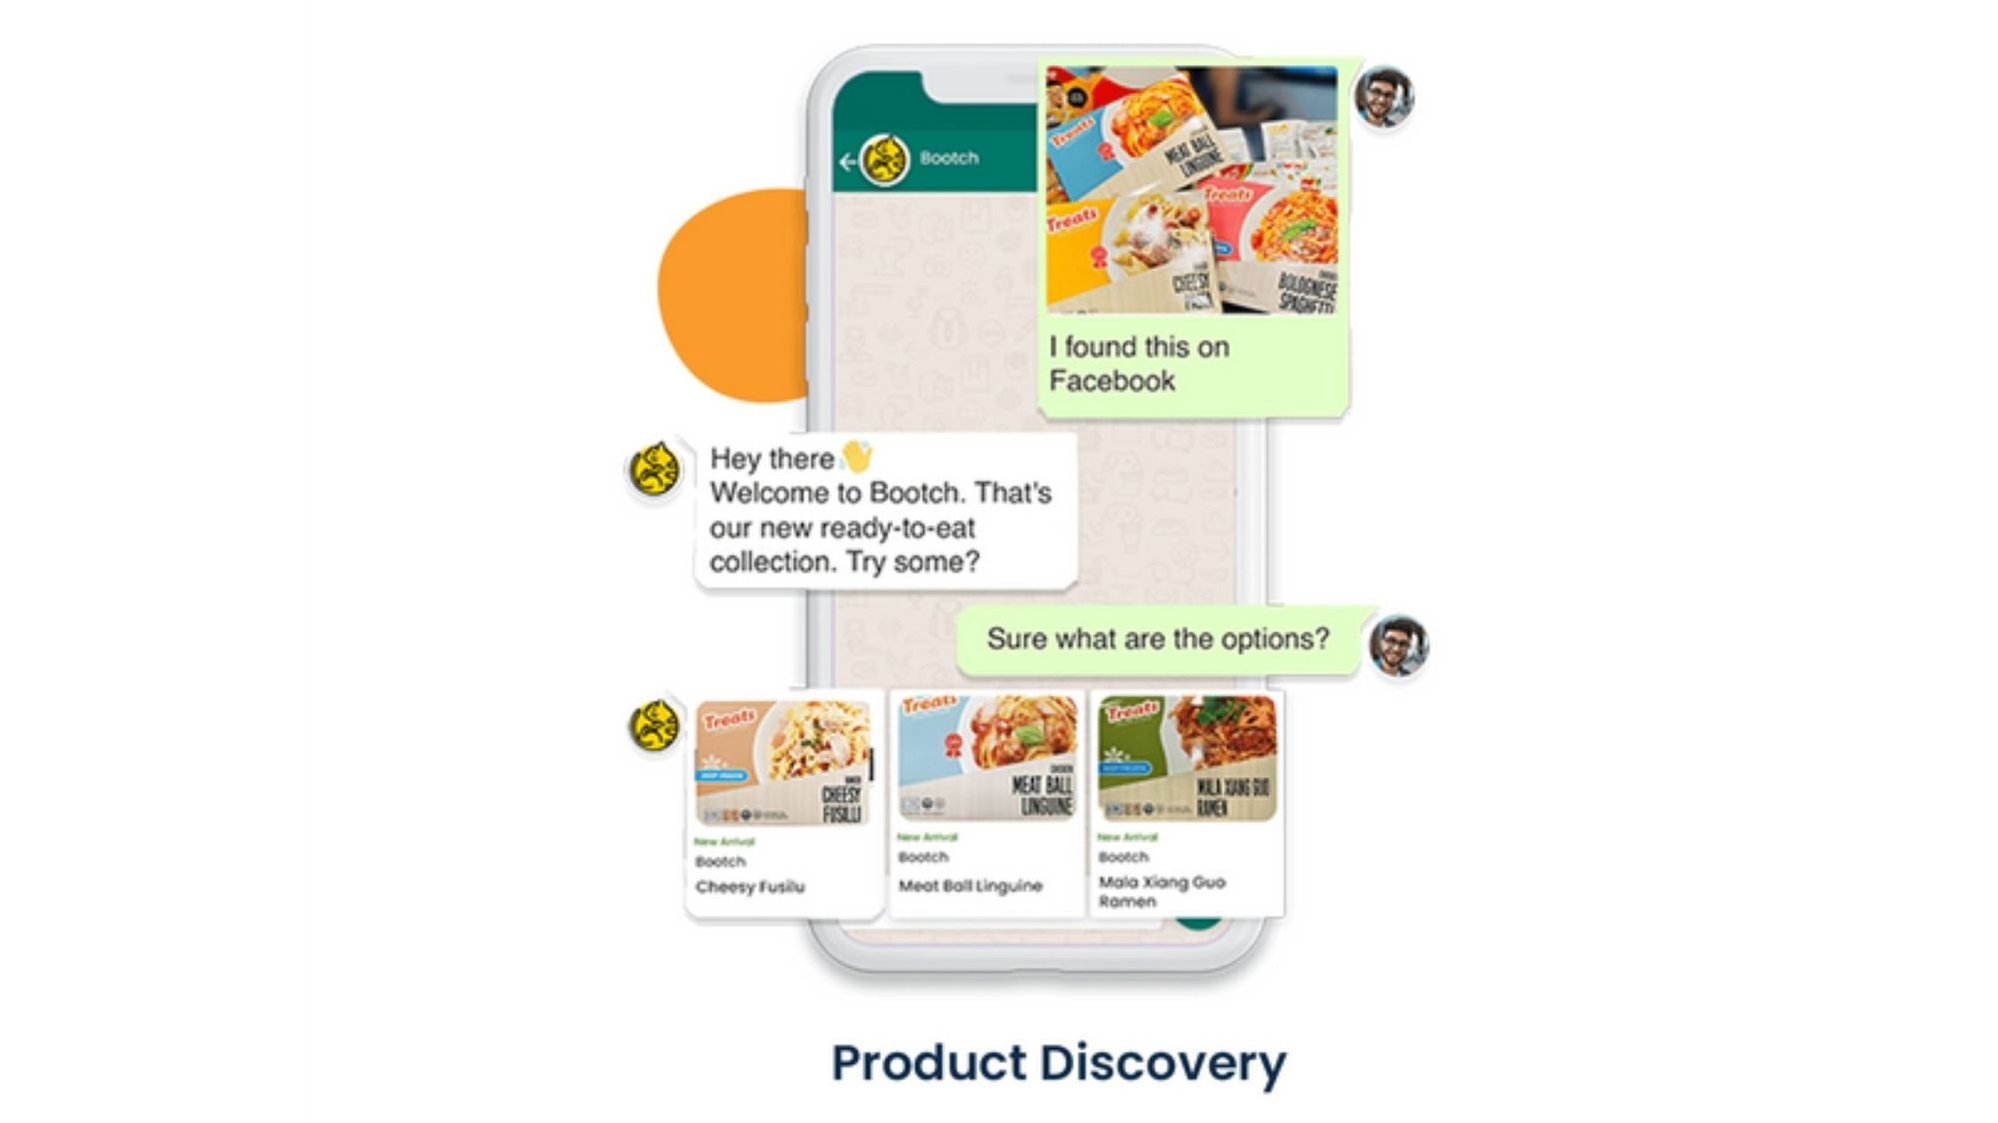 Product discovery